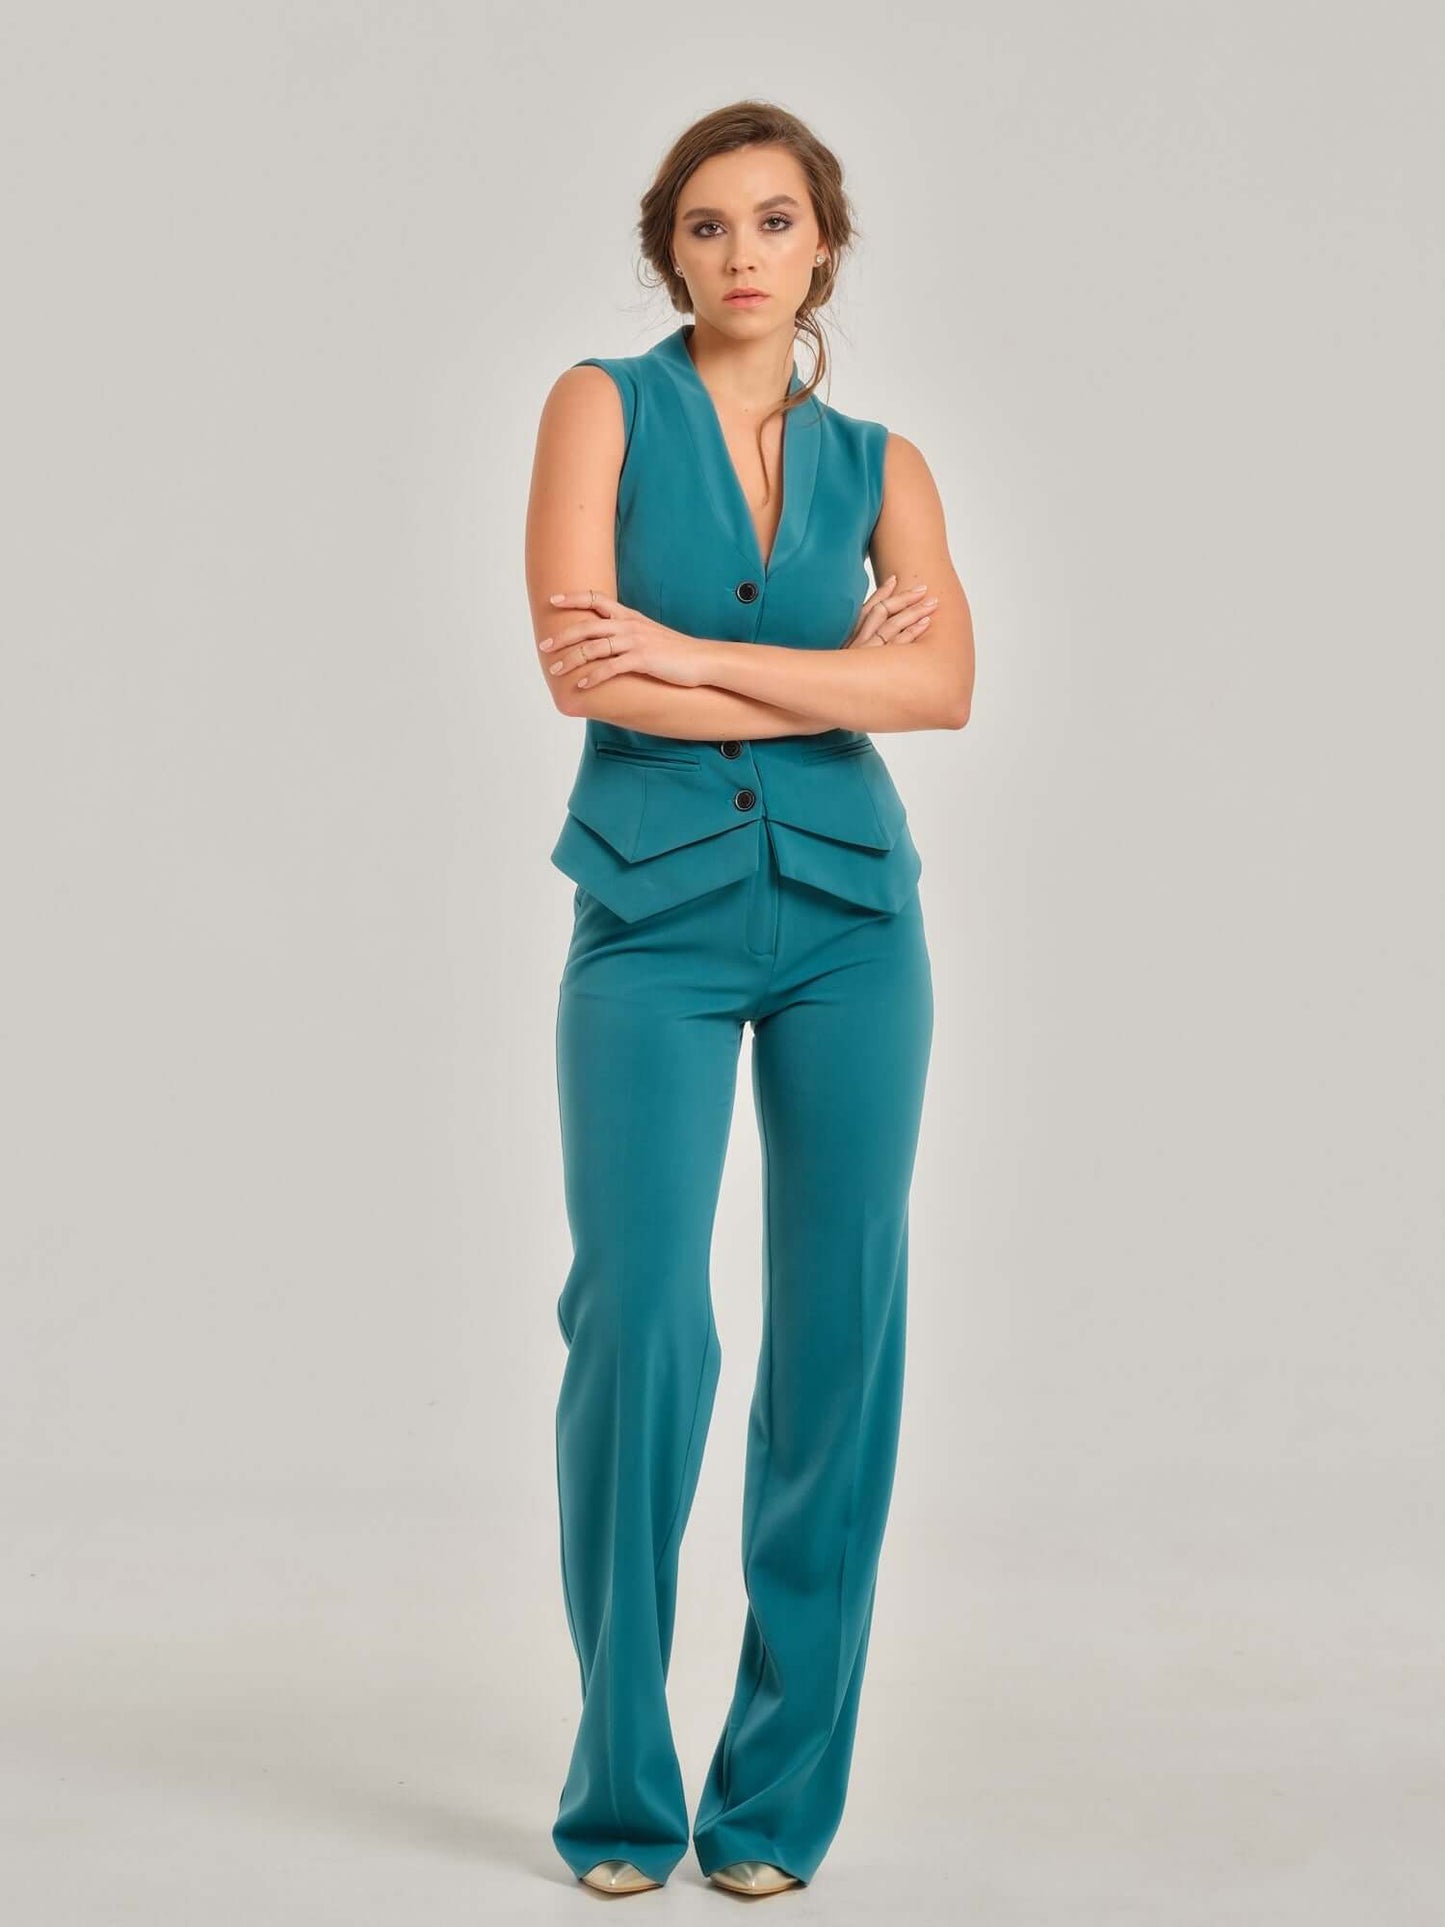 Tia Dorraine Magic Hour Straight-Leg Trousers These classic straight-leg turquoise trousers are an essential piece for the modern businesswoman's wardrobe. The fabric provides the right level of stretch for this piece to become your favourite garment for